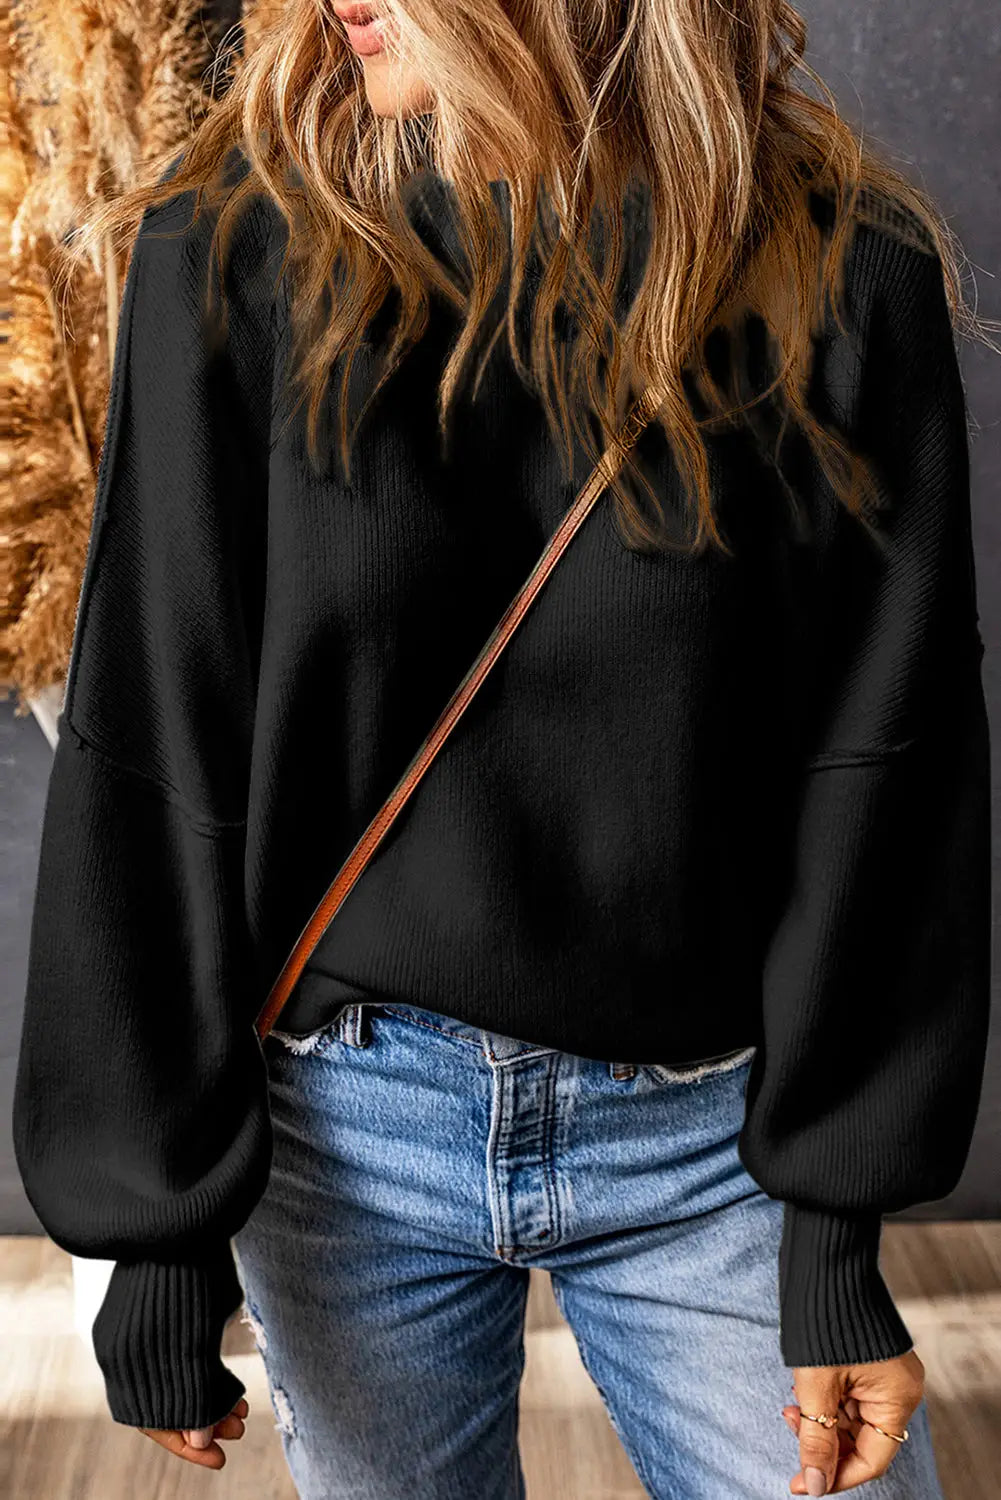 Black oversized drop shoulder bubble sleeve pullover sweater - tops